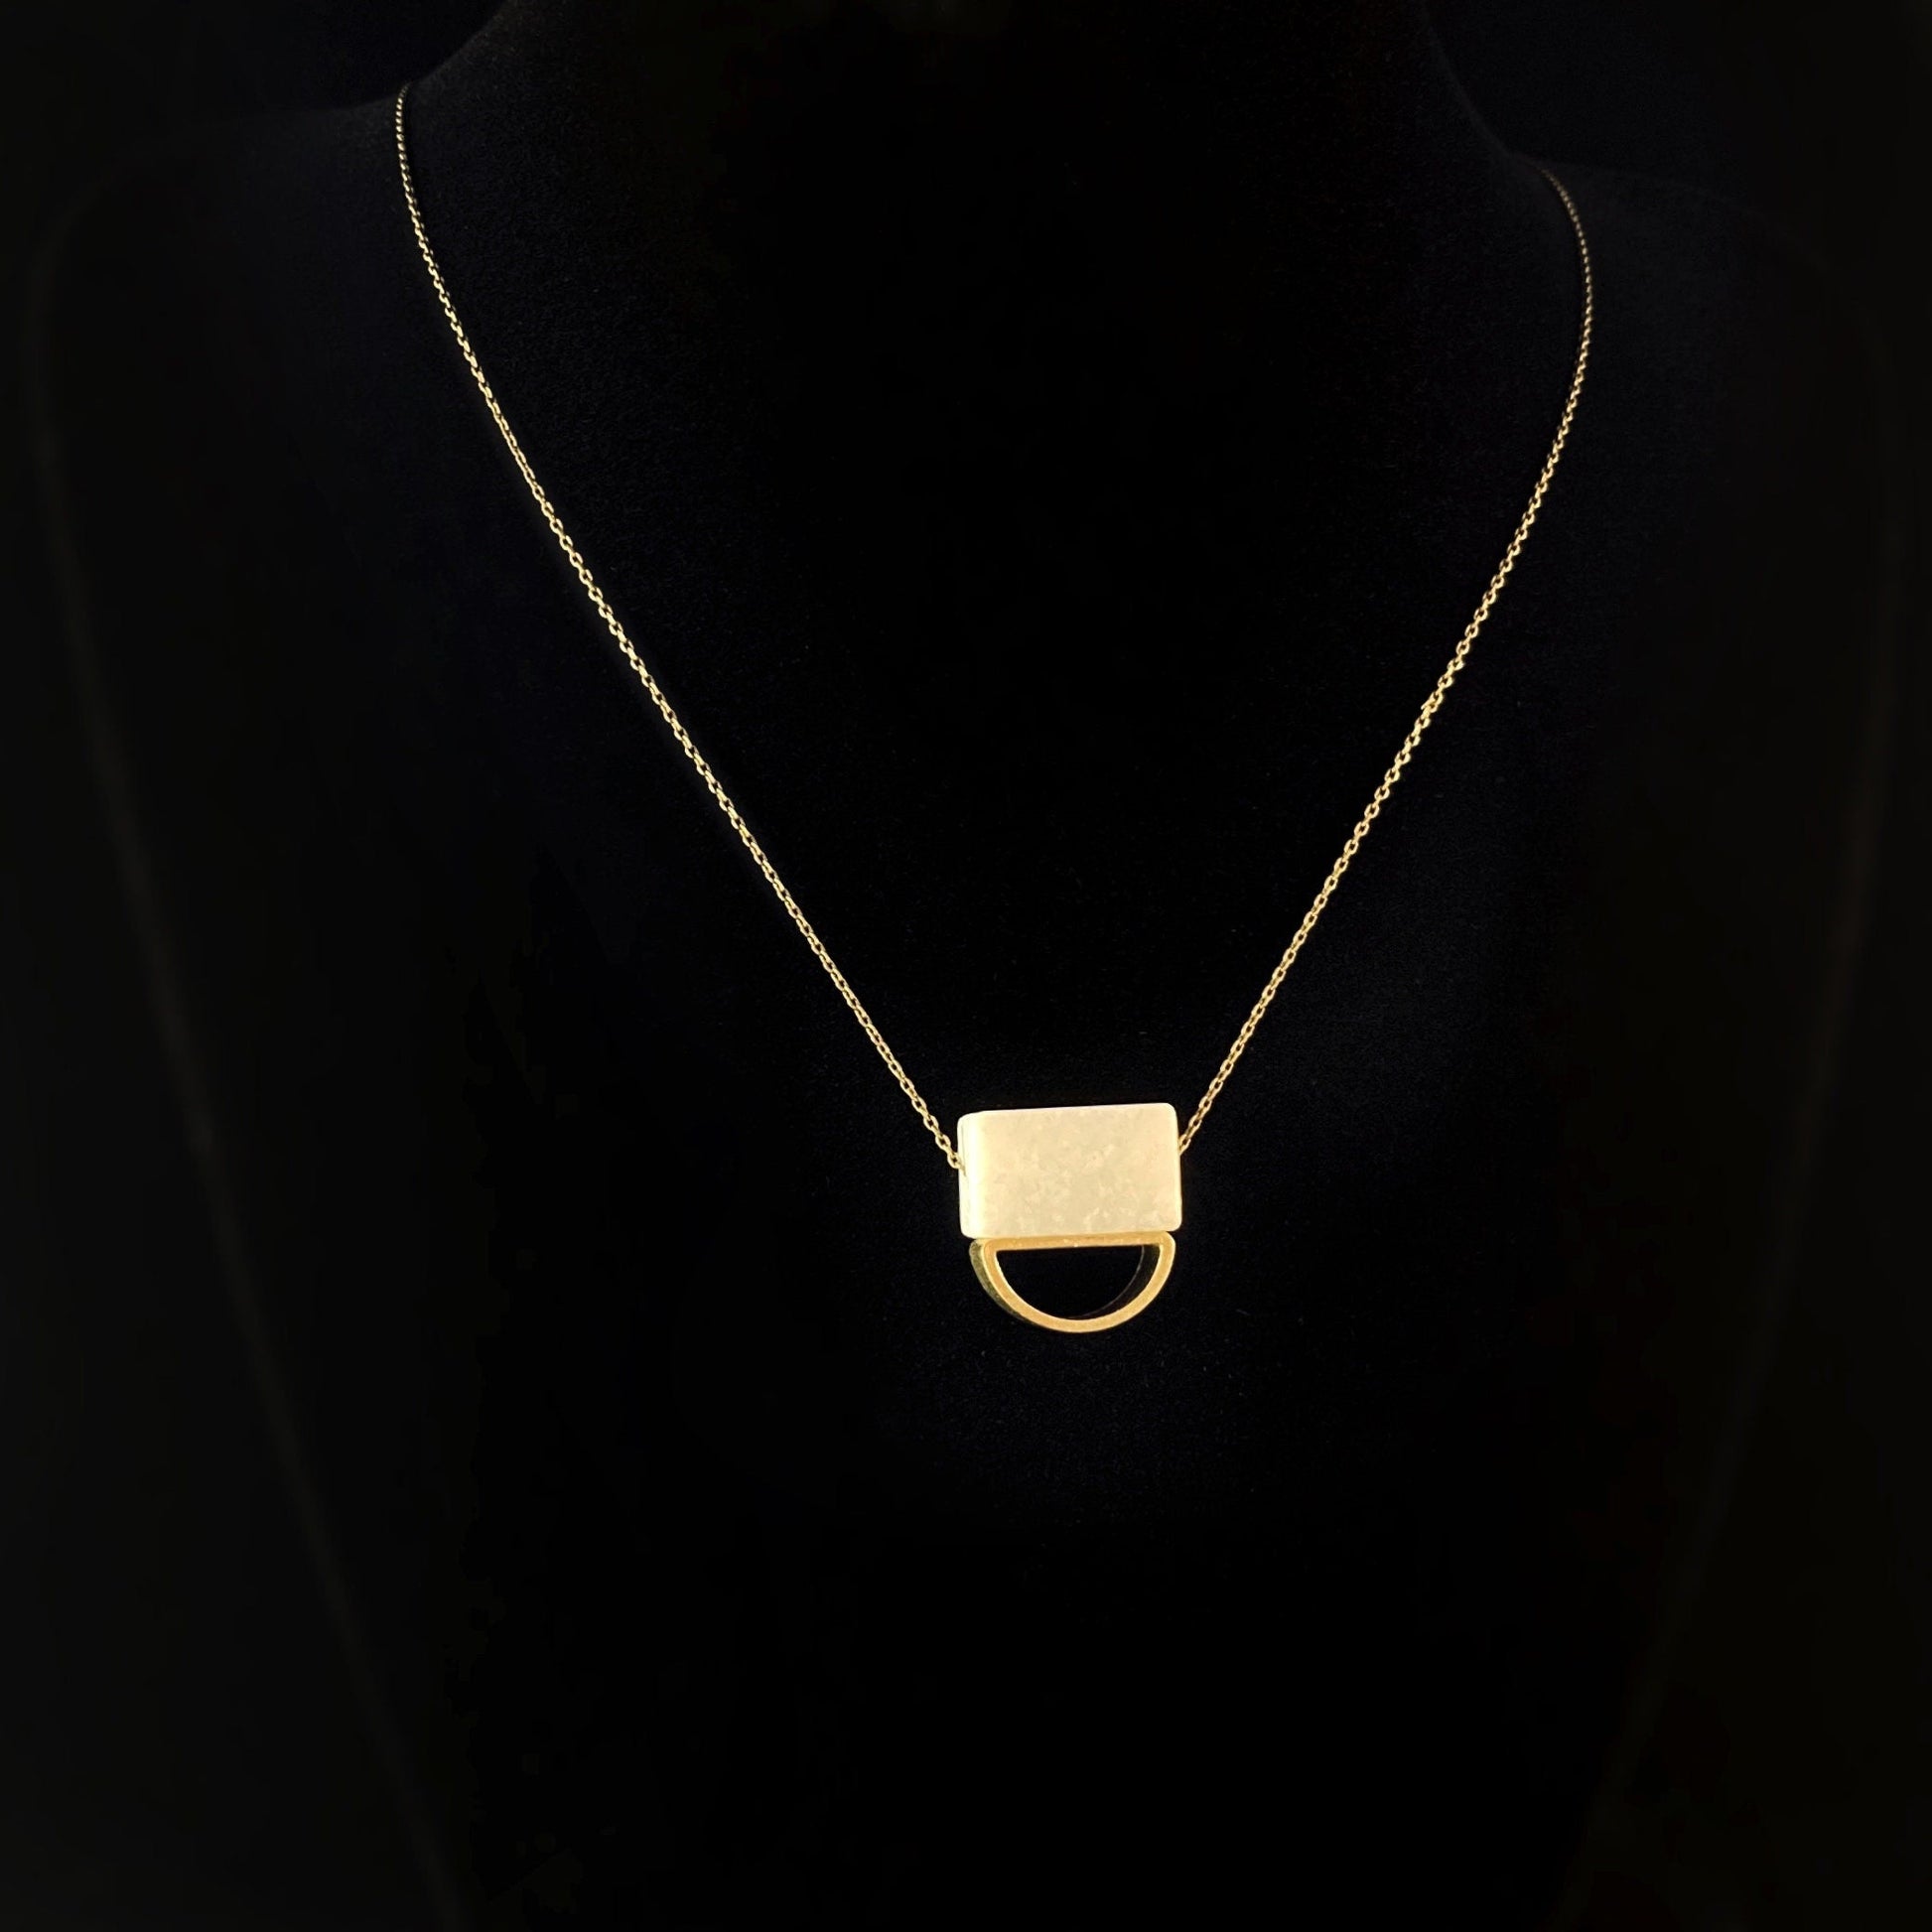 Gold Geometric Art Deco Pendant Necklace  - 18kt Gold Over Brass Necklace with Square Agate Bead, David Aubrey Jewelry